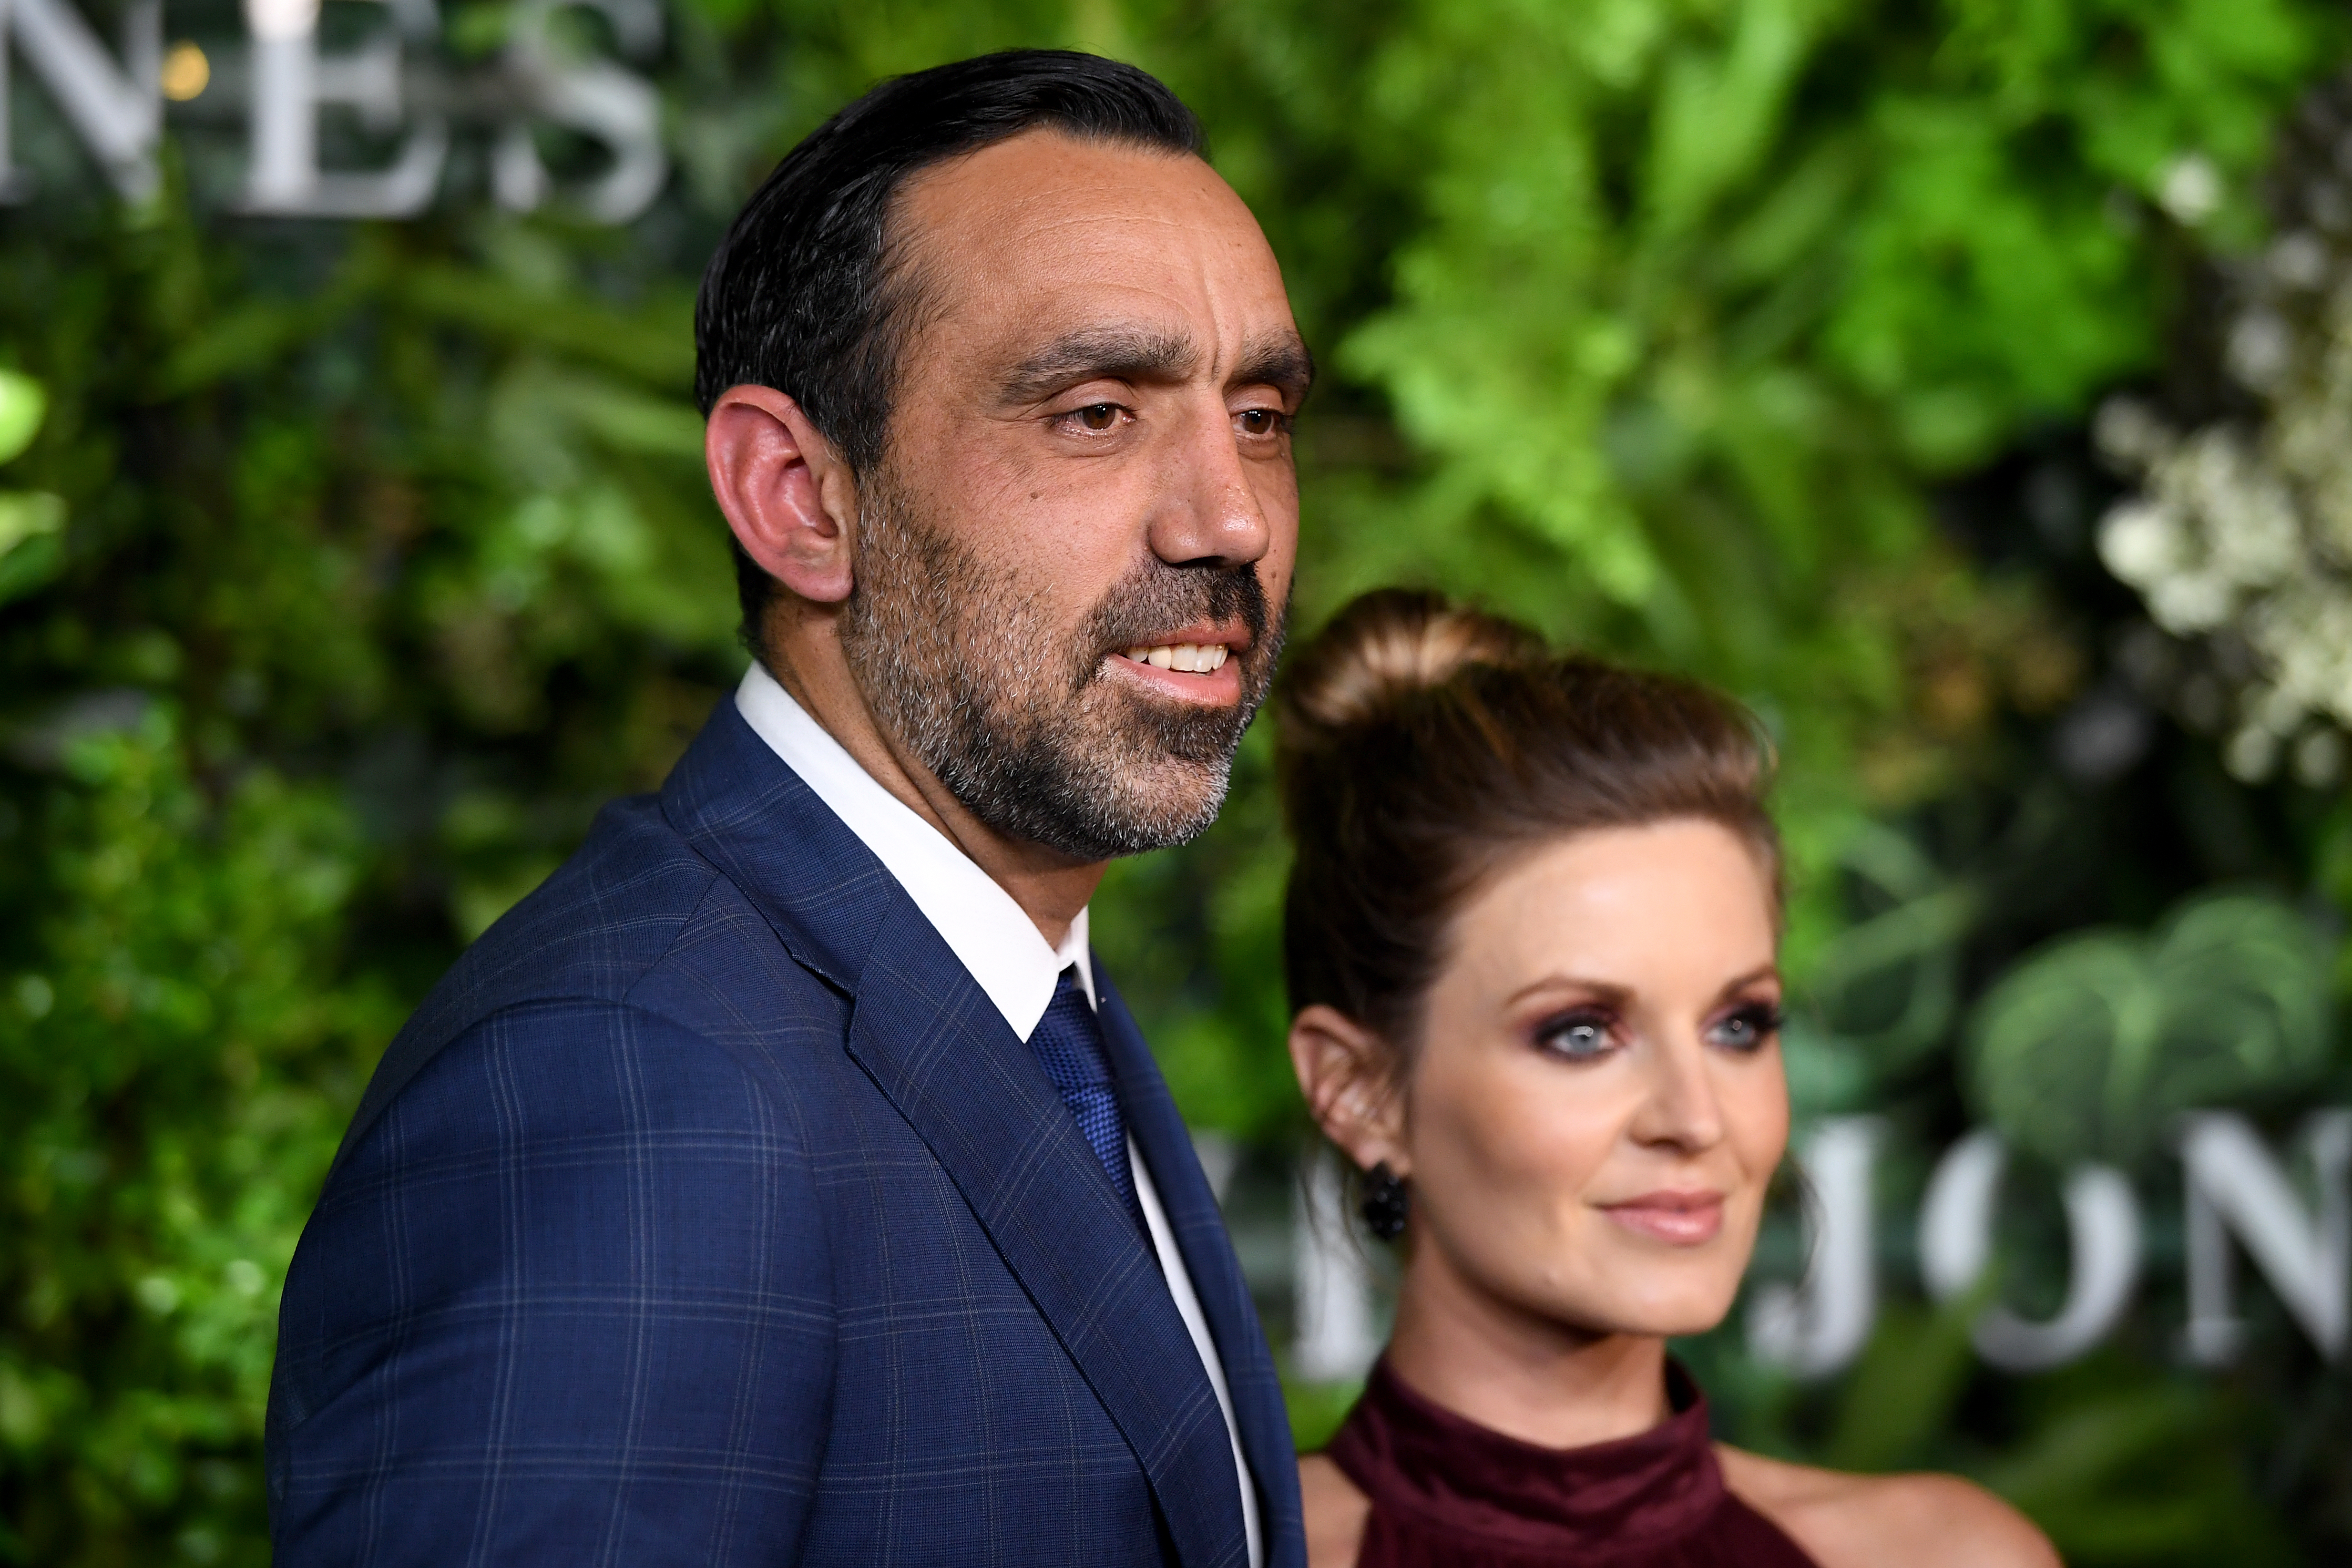 Adam Goodes And Wife Natalie Croker Have Welcomed Their First Bub